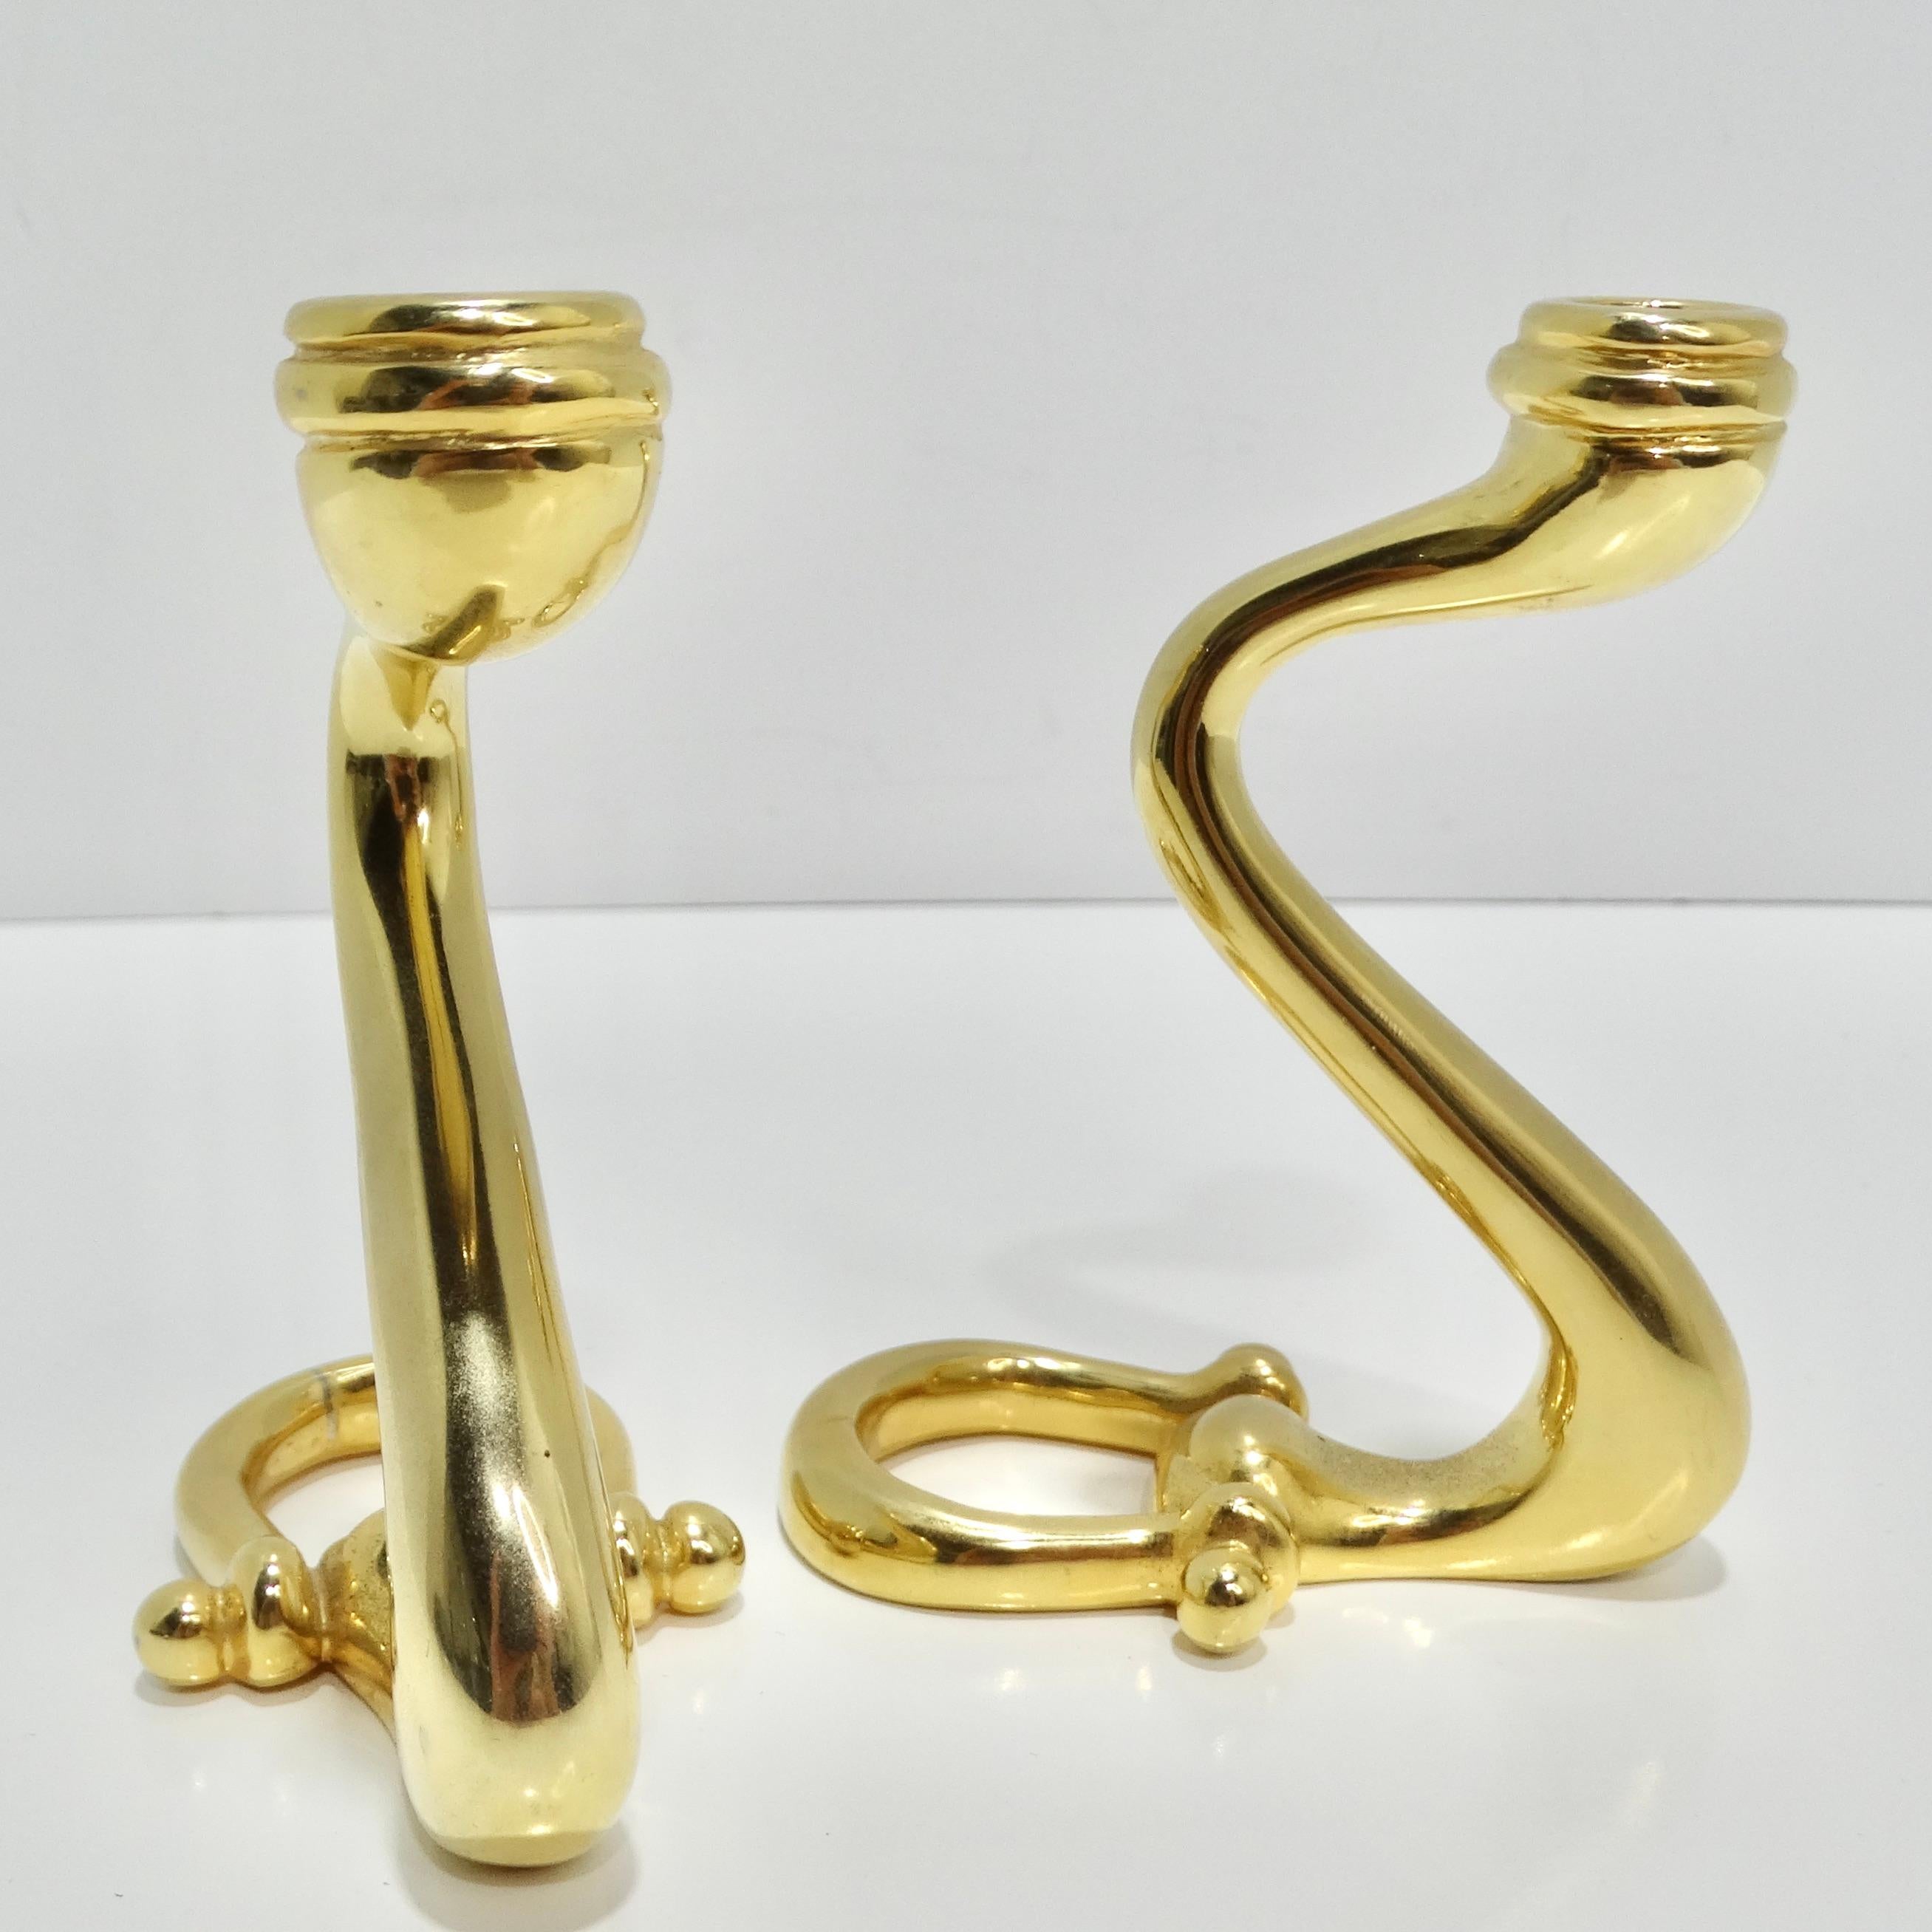 Introducing the Gucci 1980s Brass Horse Bit Candle Holders, a captivating and luxurious addition to your home decor collection. Crafted from brass with a rich gold-tone finish, these candle holders exude elegance and sophistication.

The candle